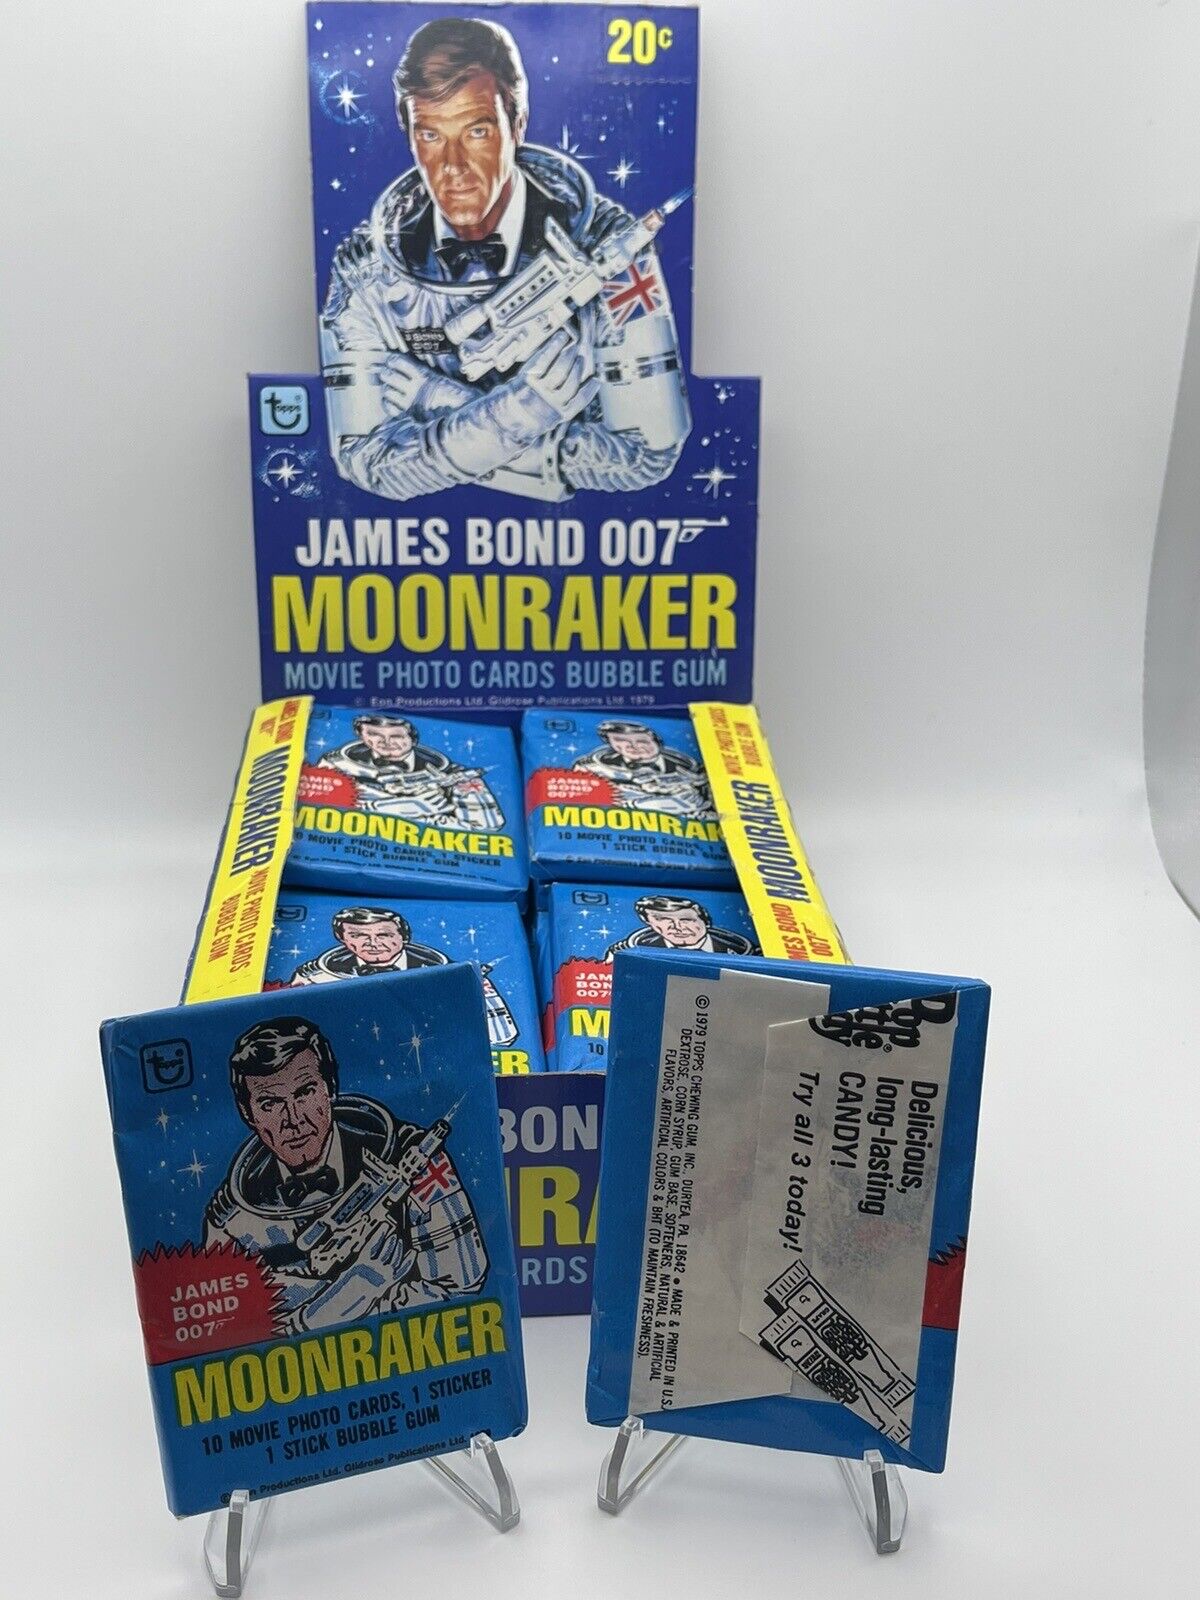 1979 TOPPS JAMES BOND 007 MOONRAKER MOVIE PHOTO CARDS - SEALED WAX PACK 10 CARDS